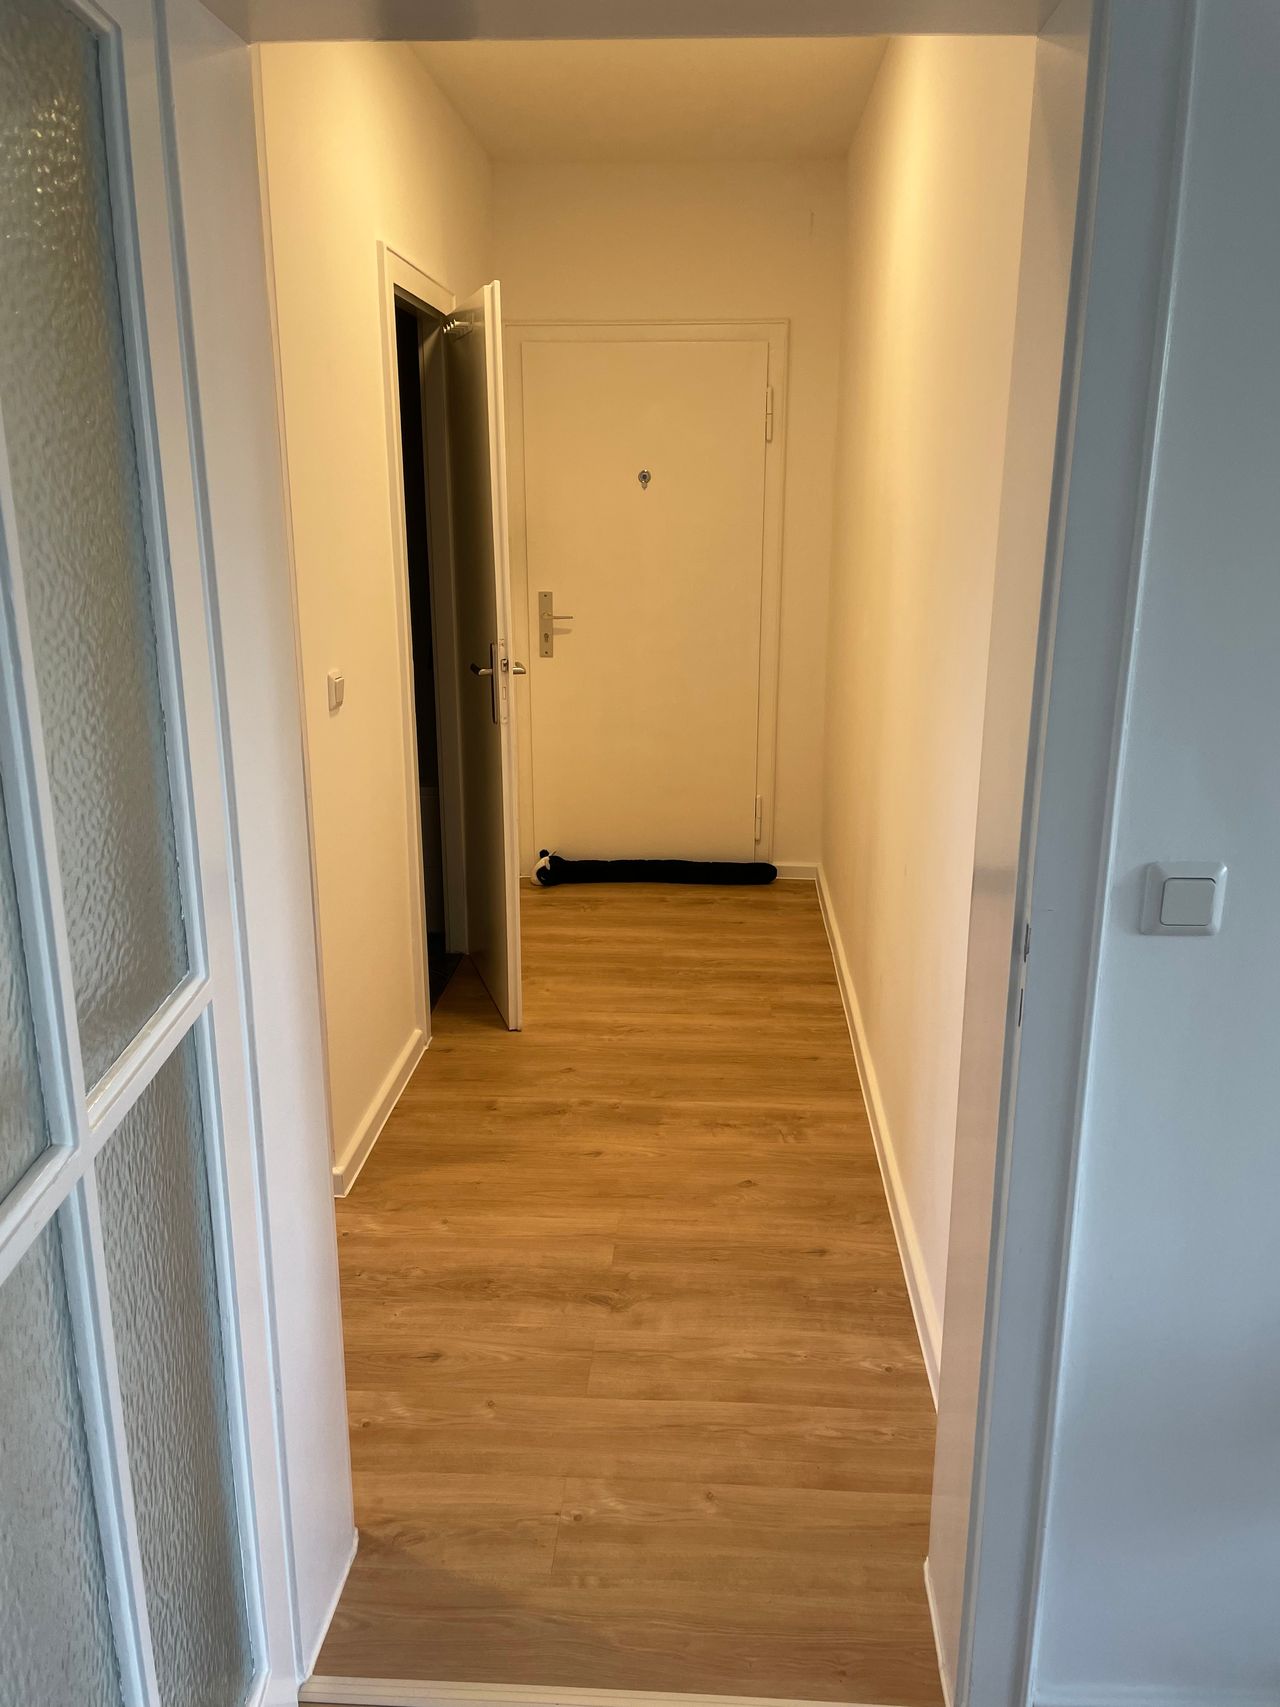 Renovated, super central, modern flat in Mitte, 2 rooms plus kitchen and balcony